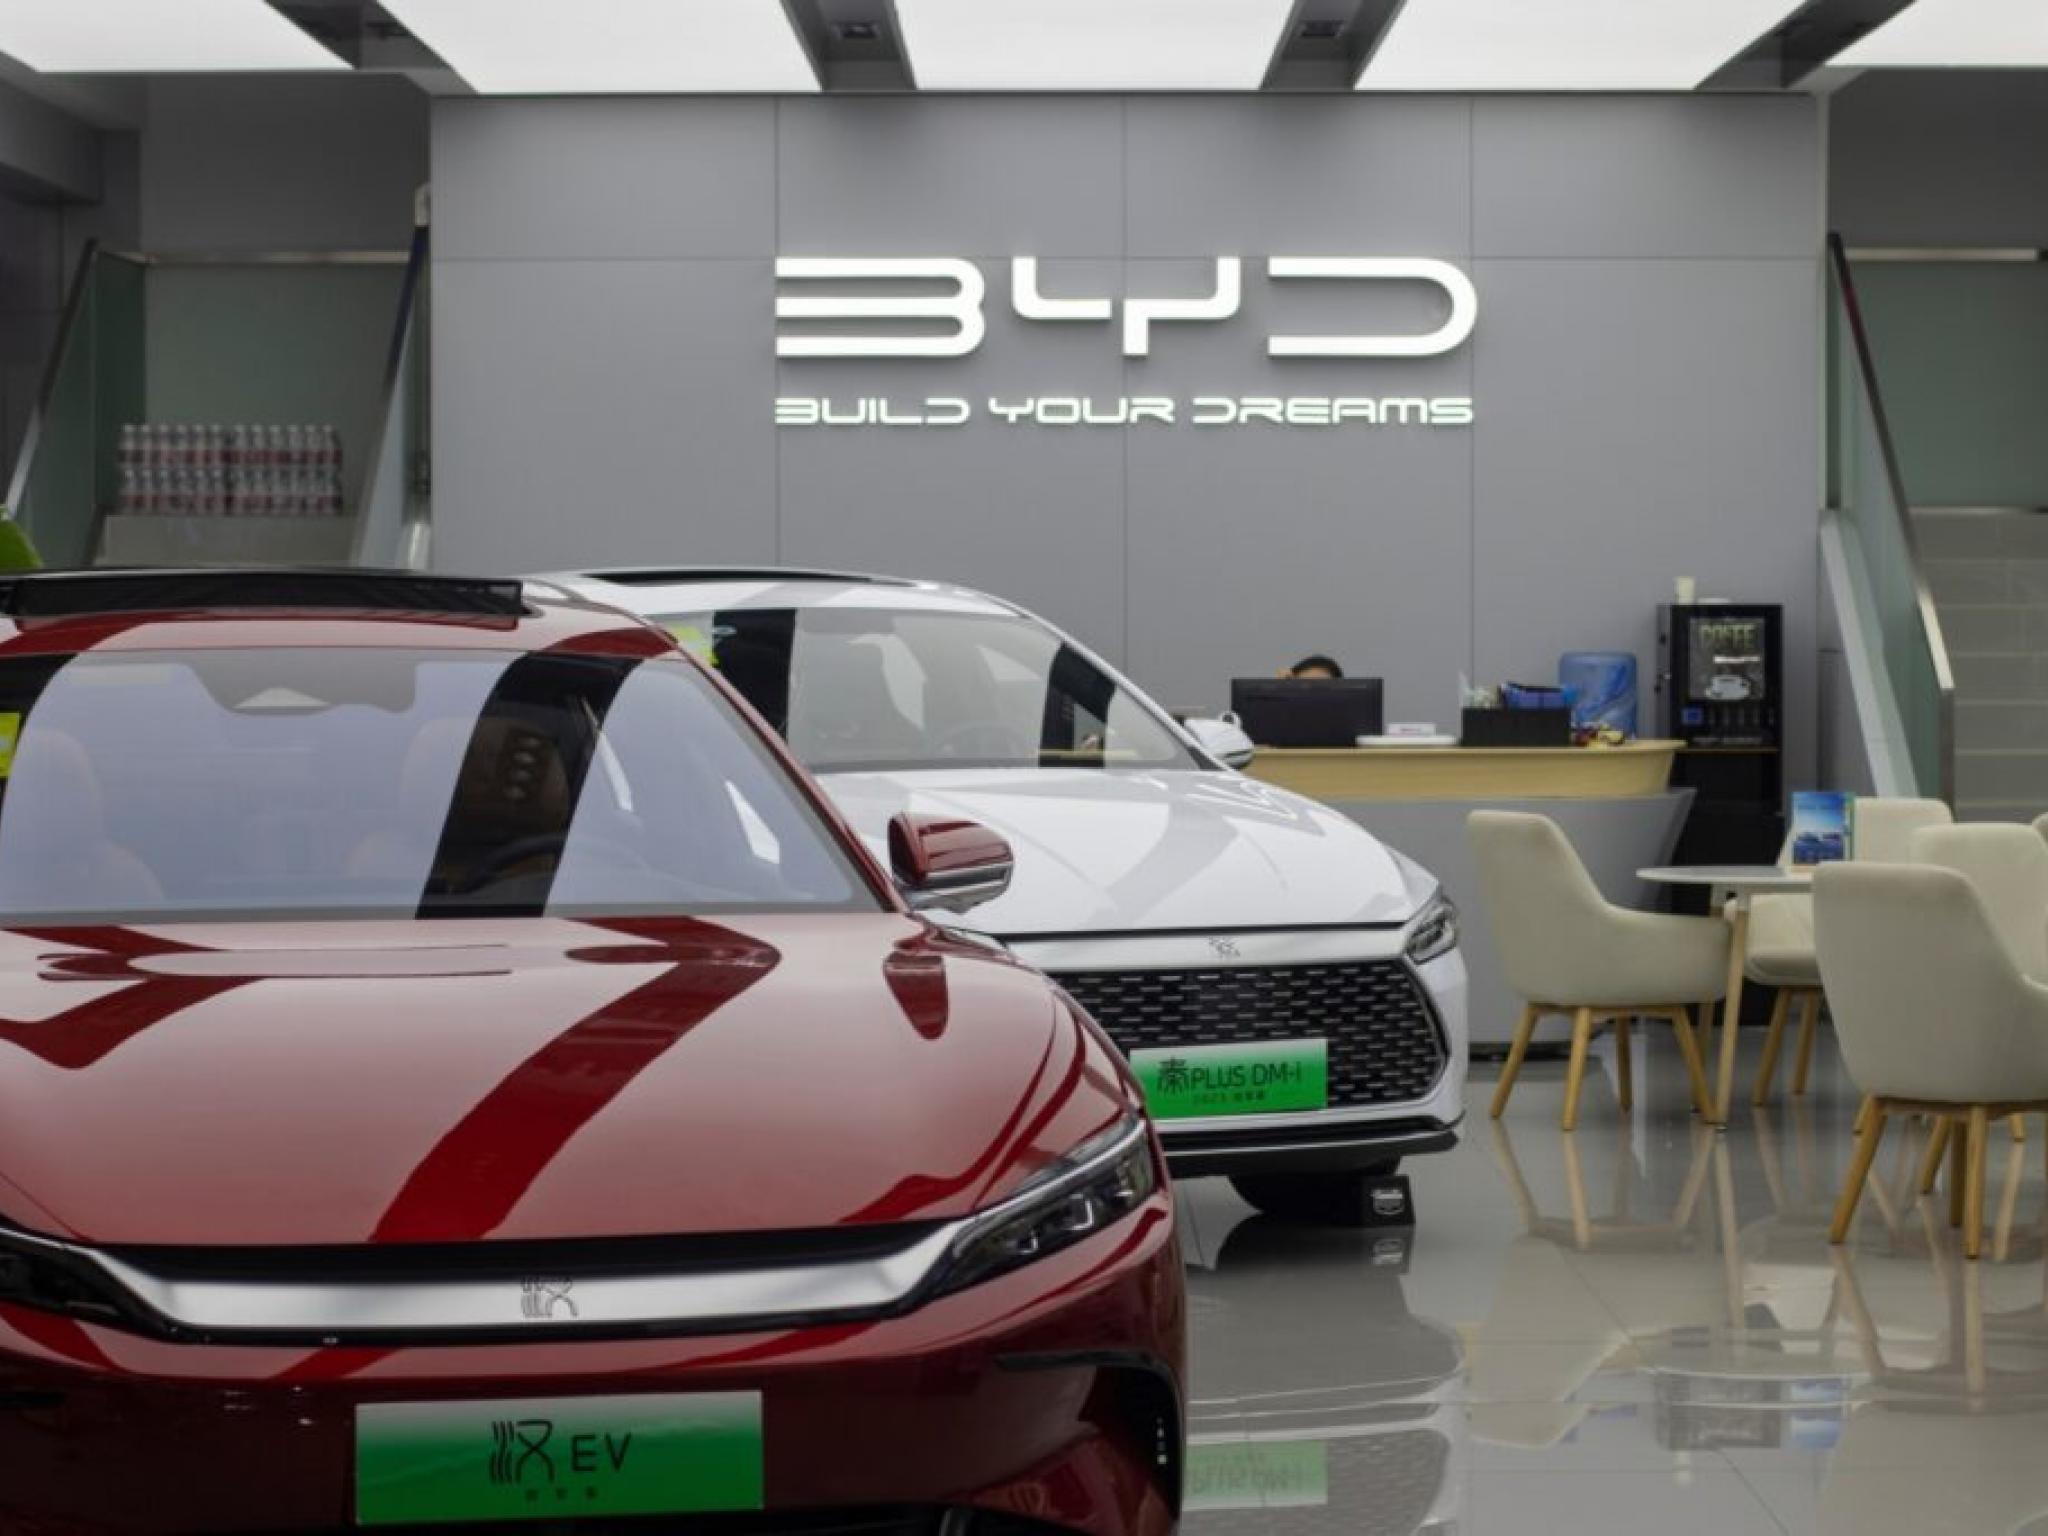  warren-buffett-backed-byd-to-build-1b-plant-in-turkey-with-annual-production-capacity-of-150k-vehicles 